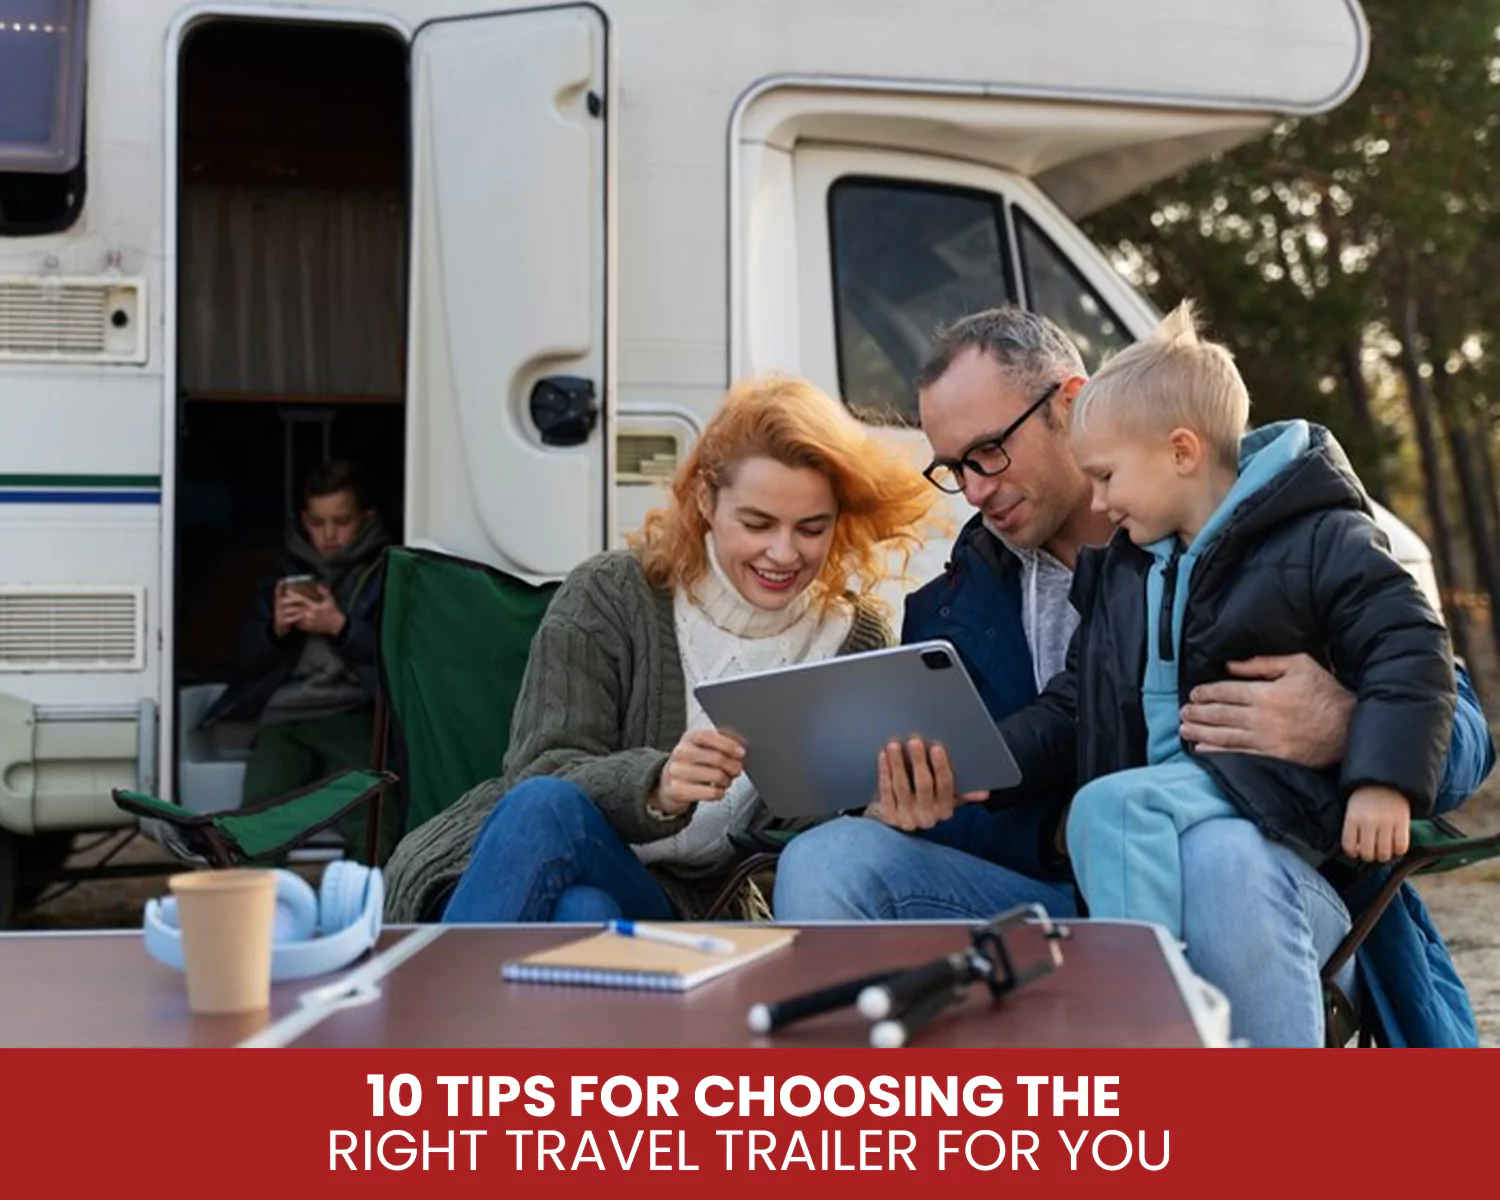 10 Tips for Choosing the Right Travel Trailer for You